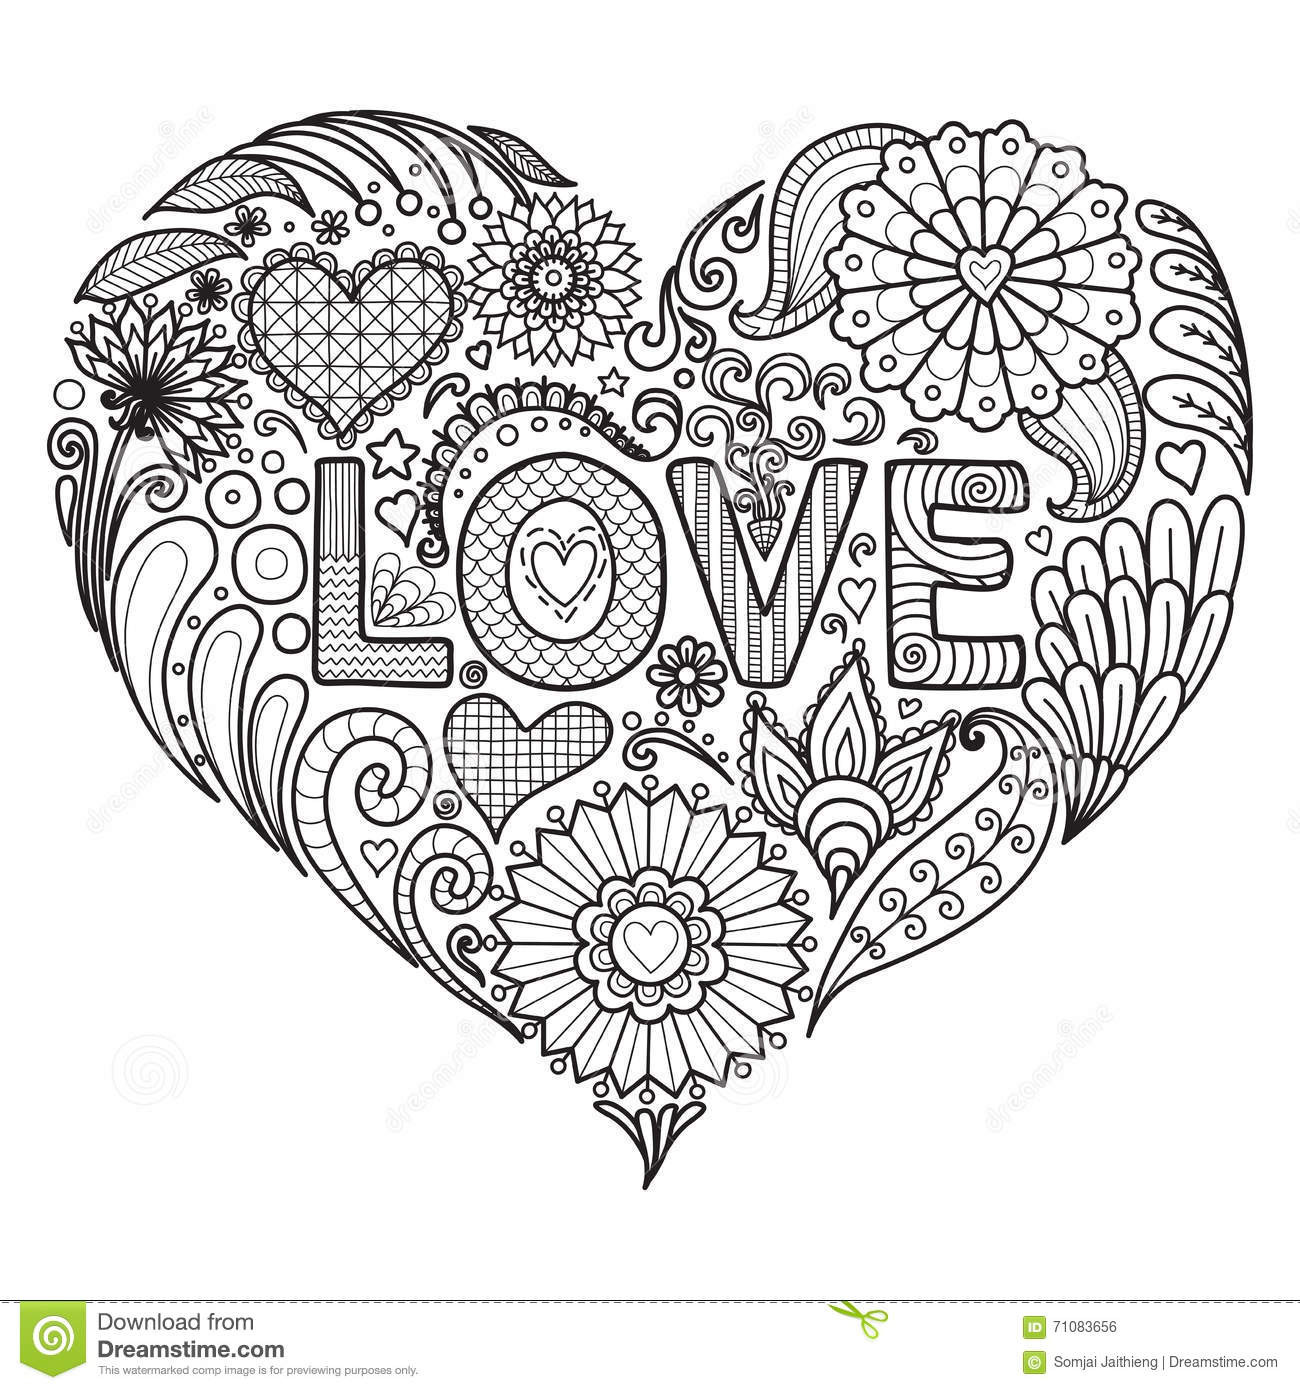 Heart Coloring Pages For Adults
 Flowers In Heart Shape For Coloring Books For Adult